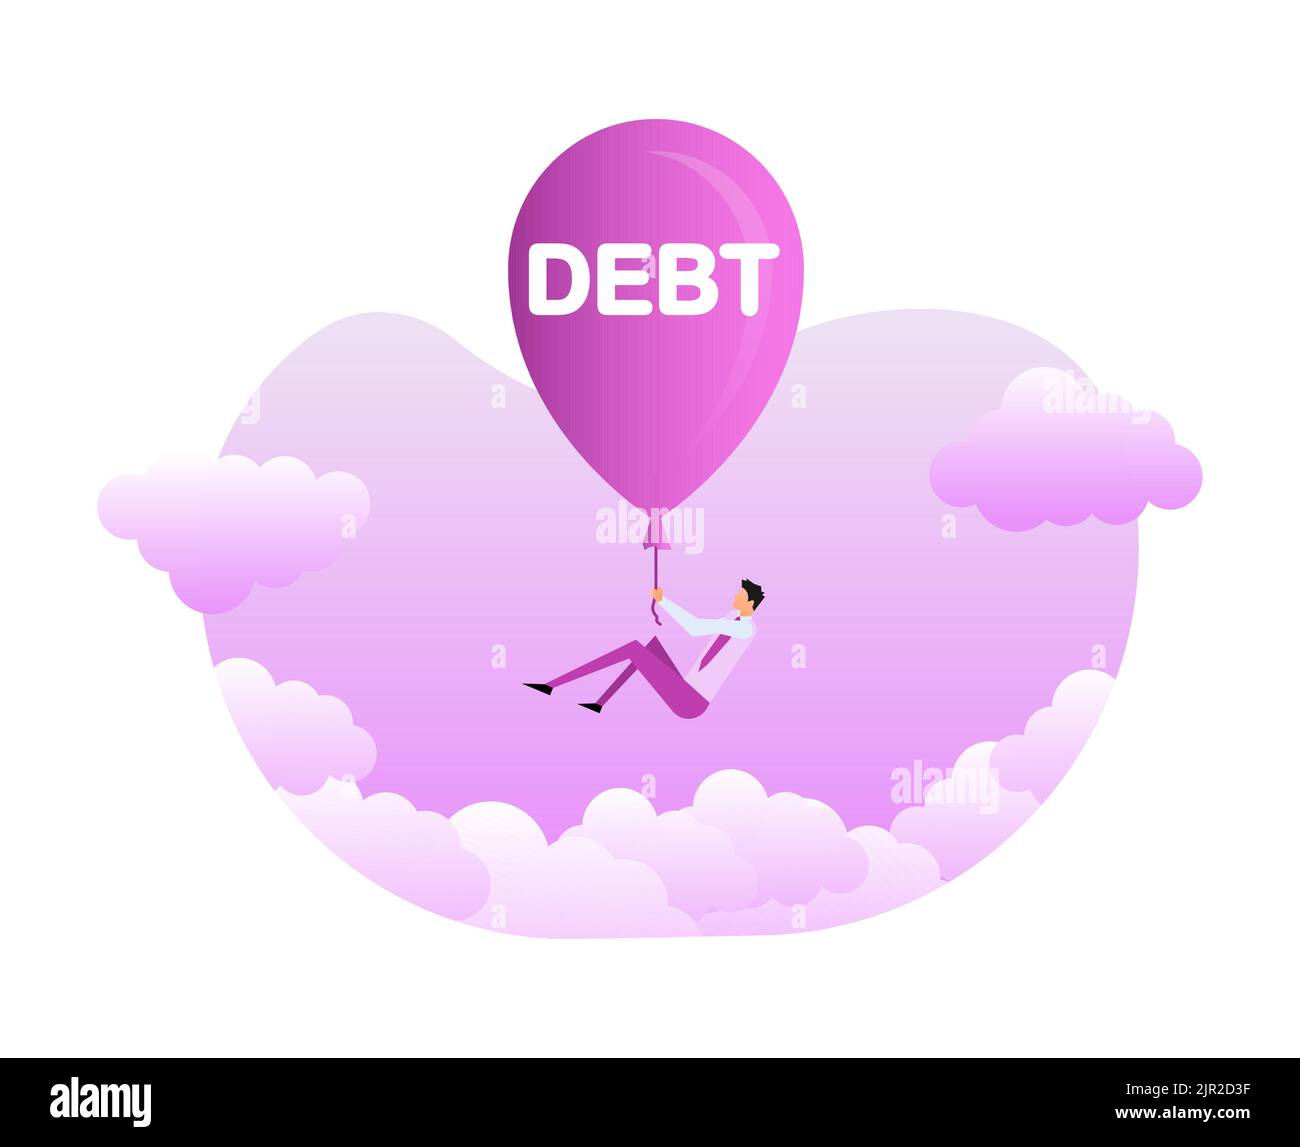 Debt. Businessman carrying. Financial freedom concept. Financial charge and duty. Stock Vector